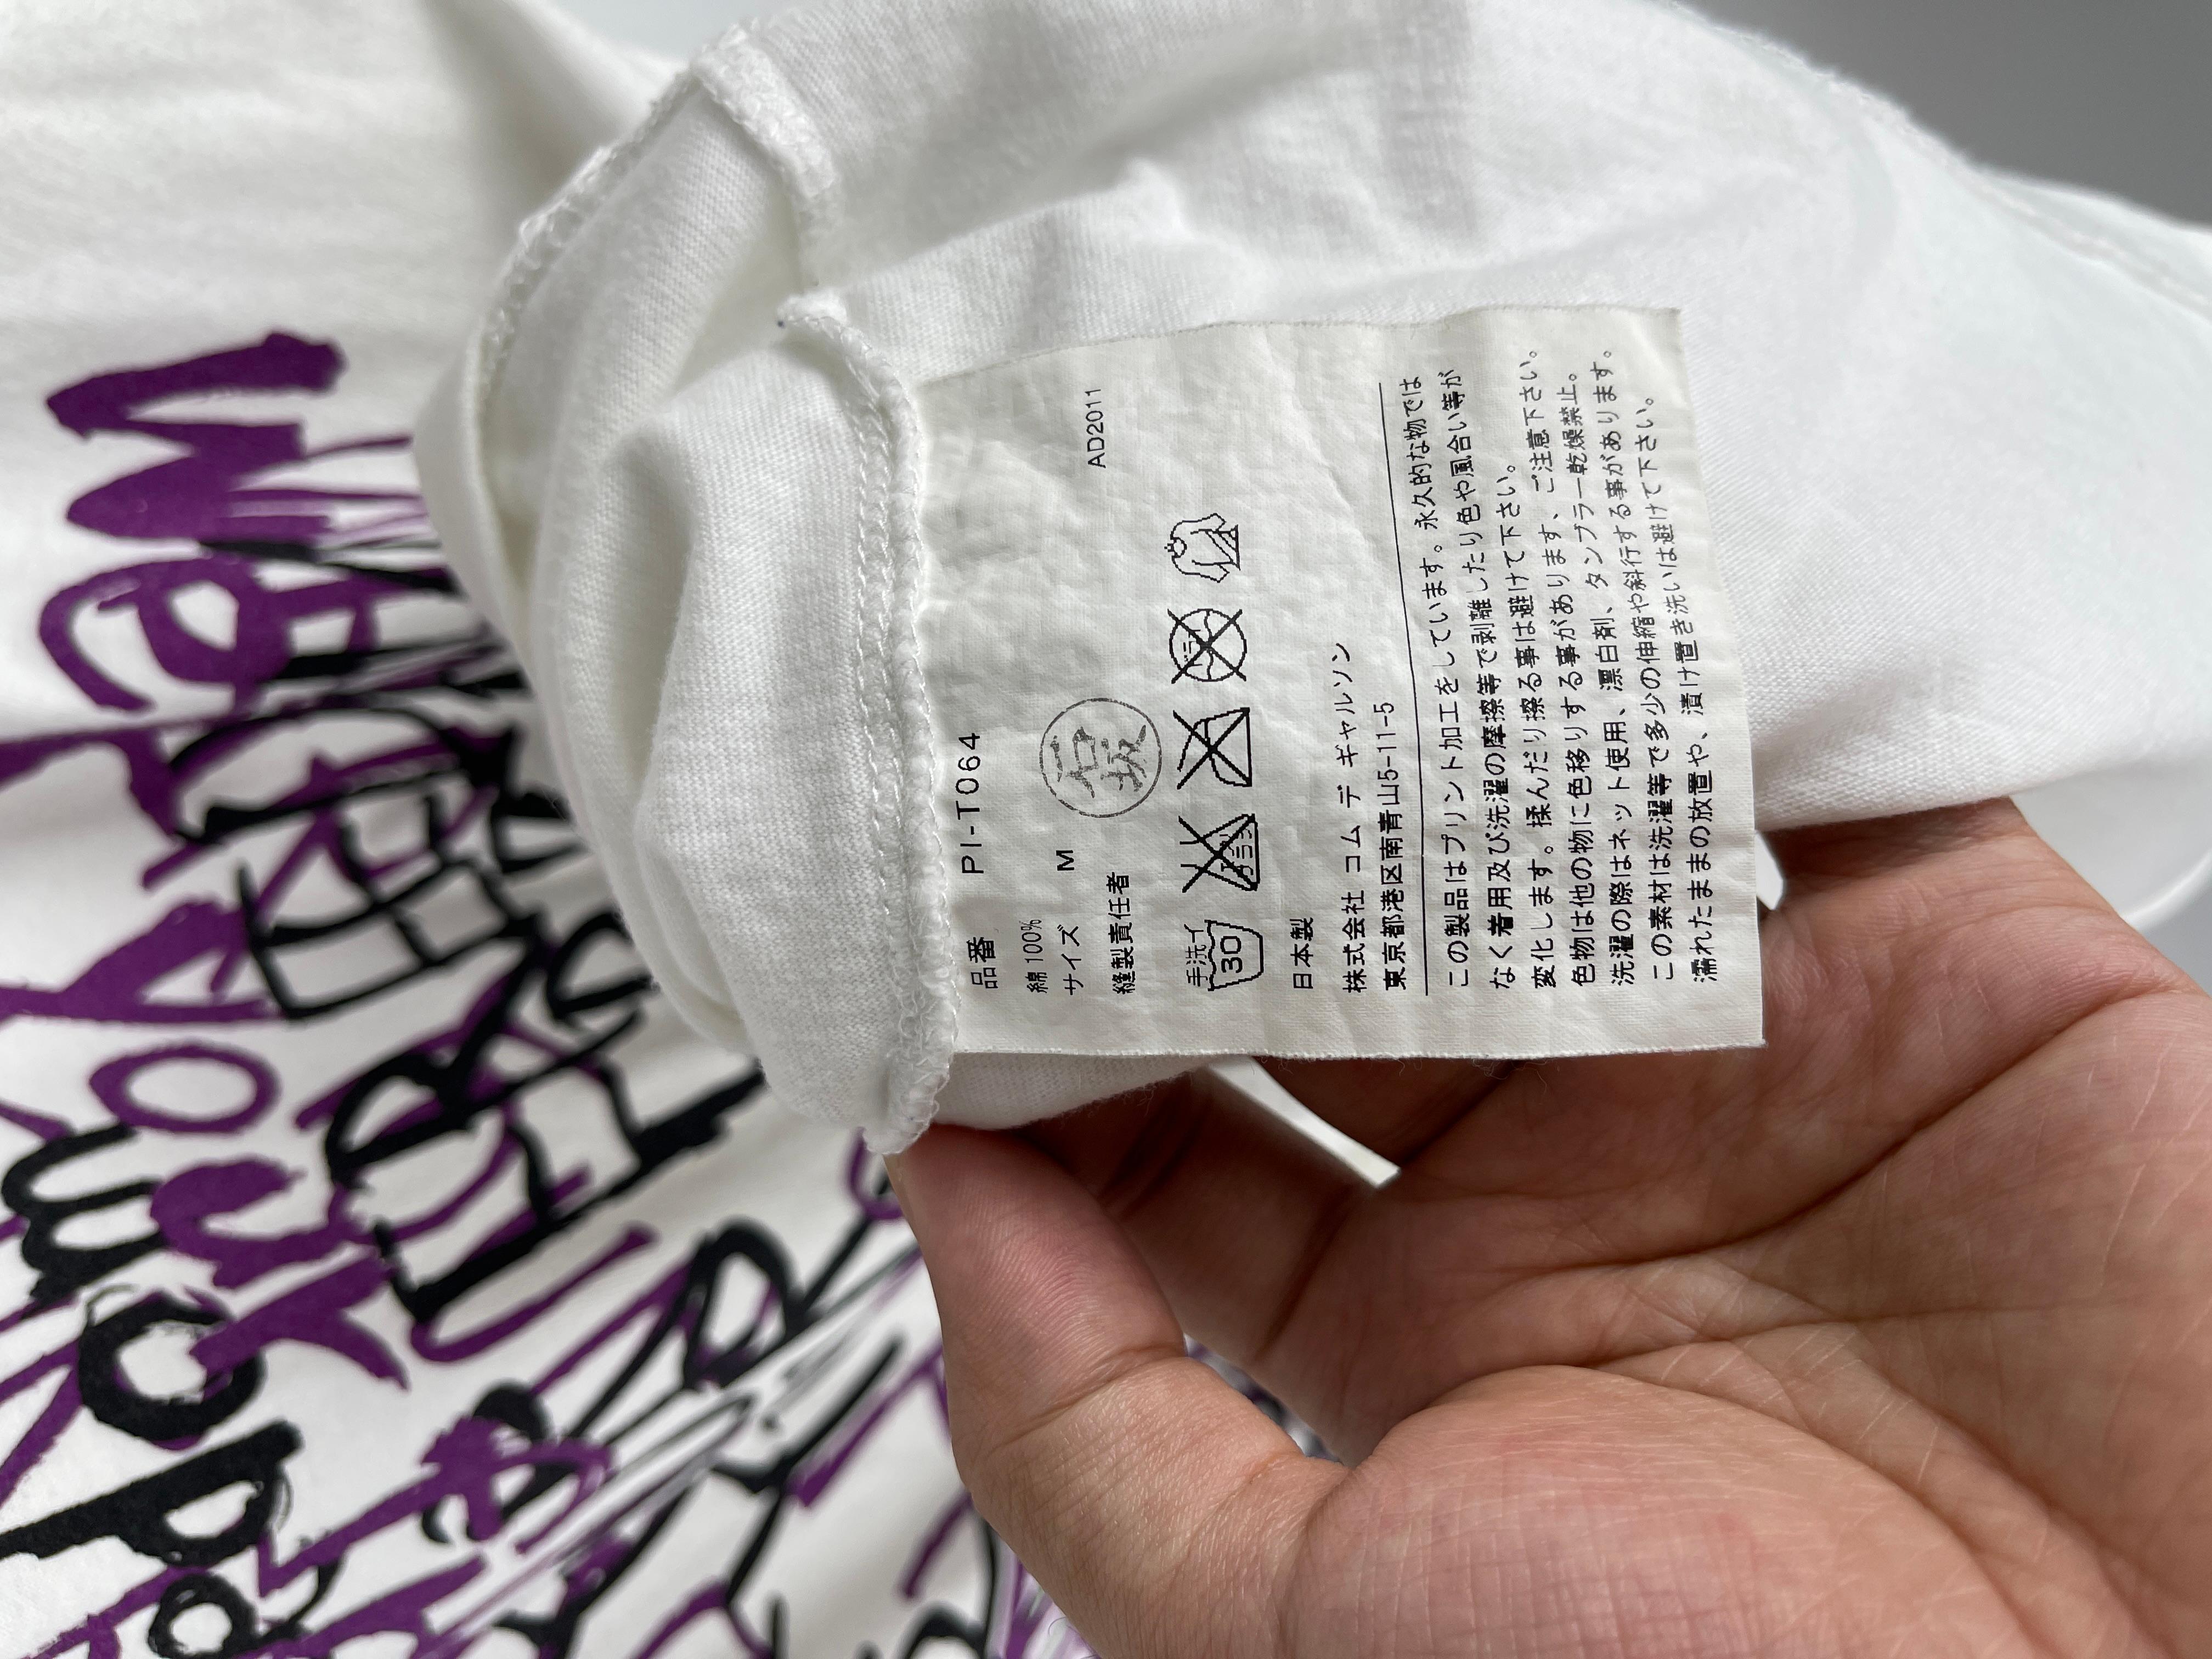 Comme des Garcons S/S2012 Confusion Text T-Shirt In Excellent Condition For Sale In Tương Mai Ward, Hoang Mai District